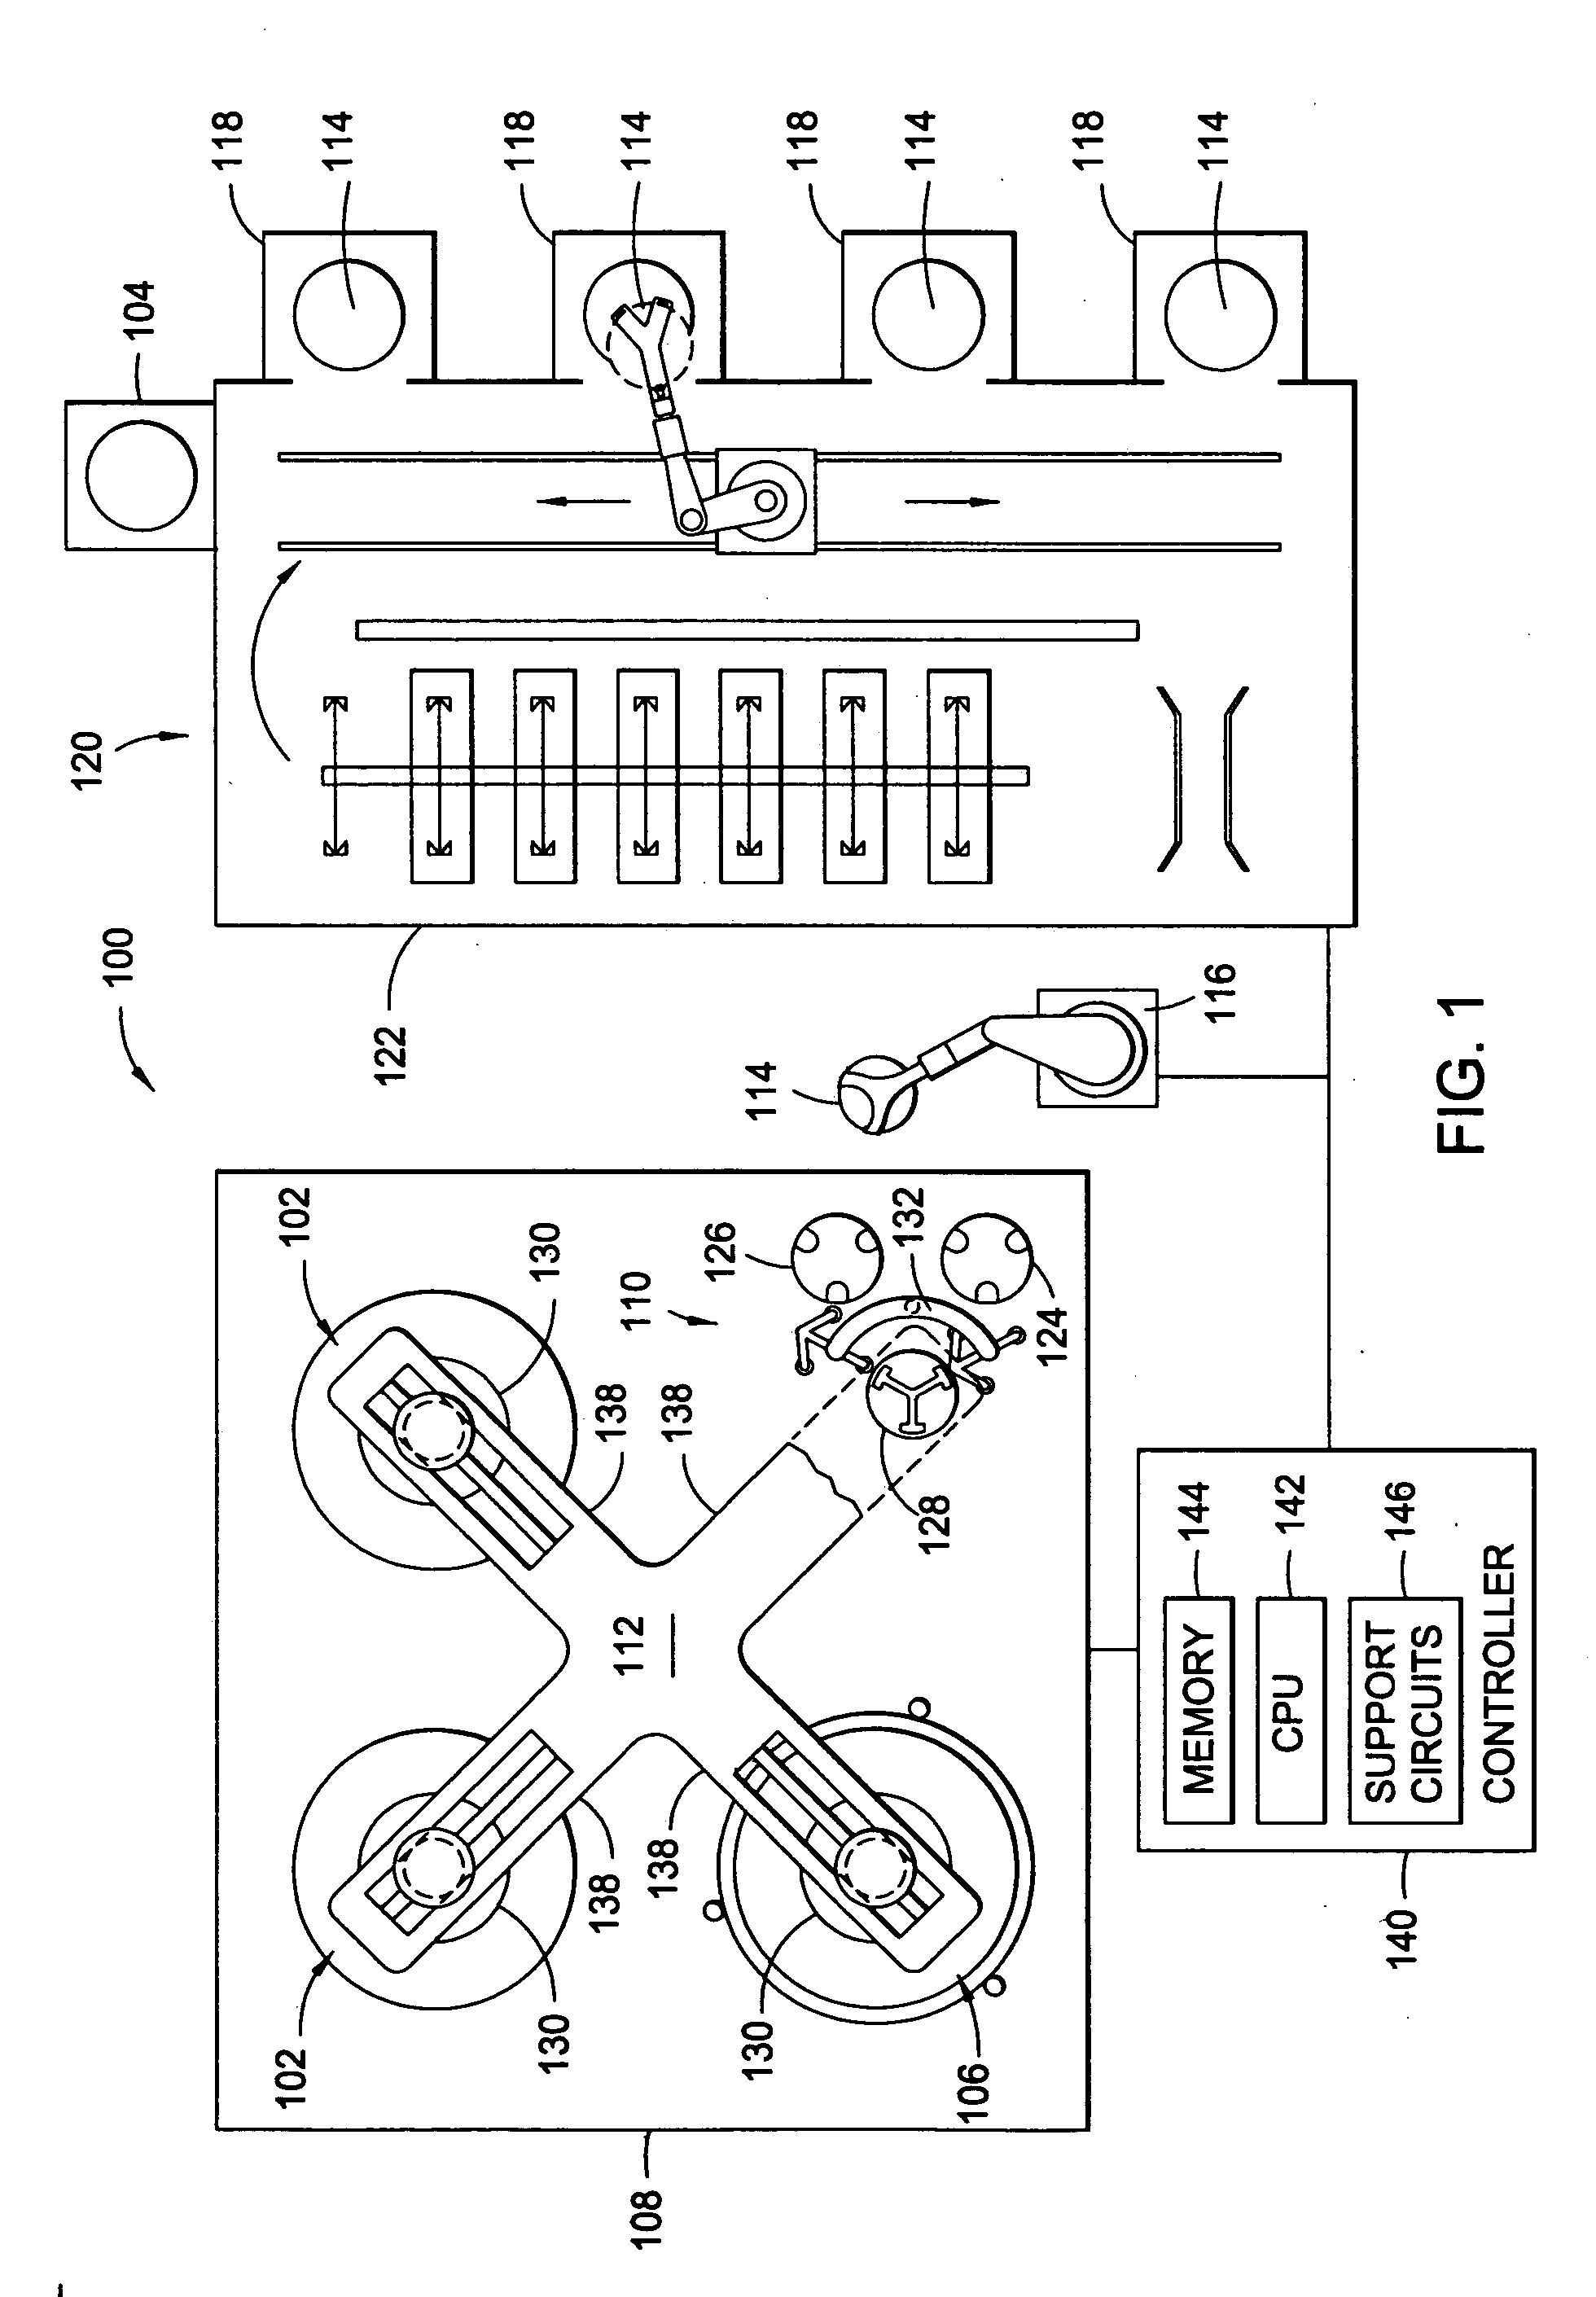 Methods and apparatus for polishing a substrate